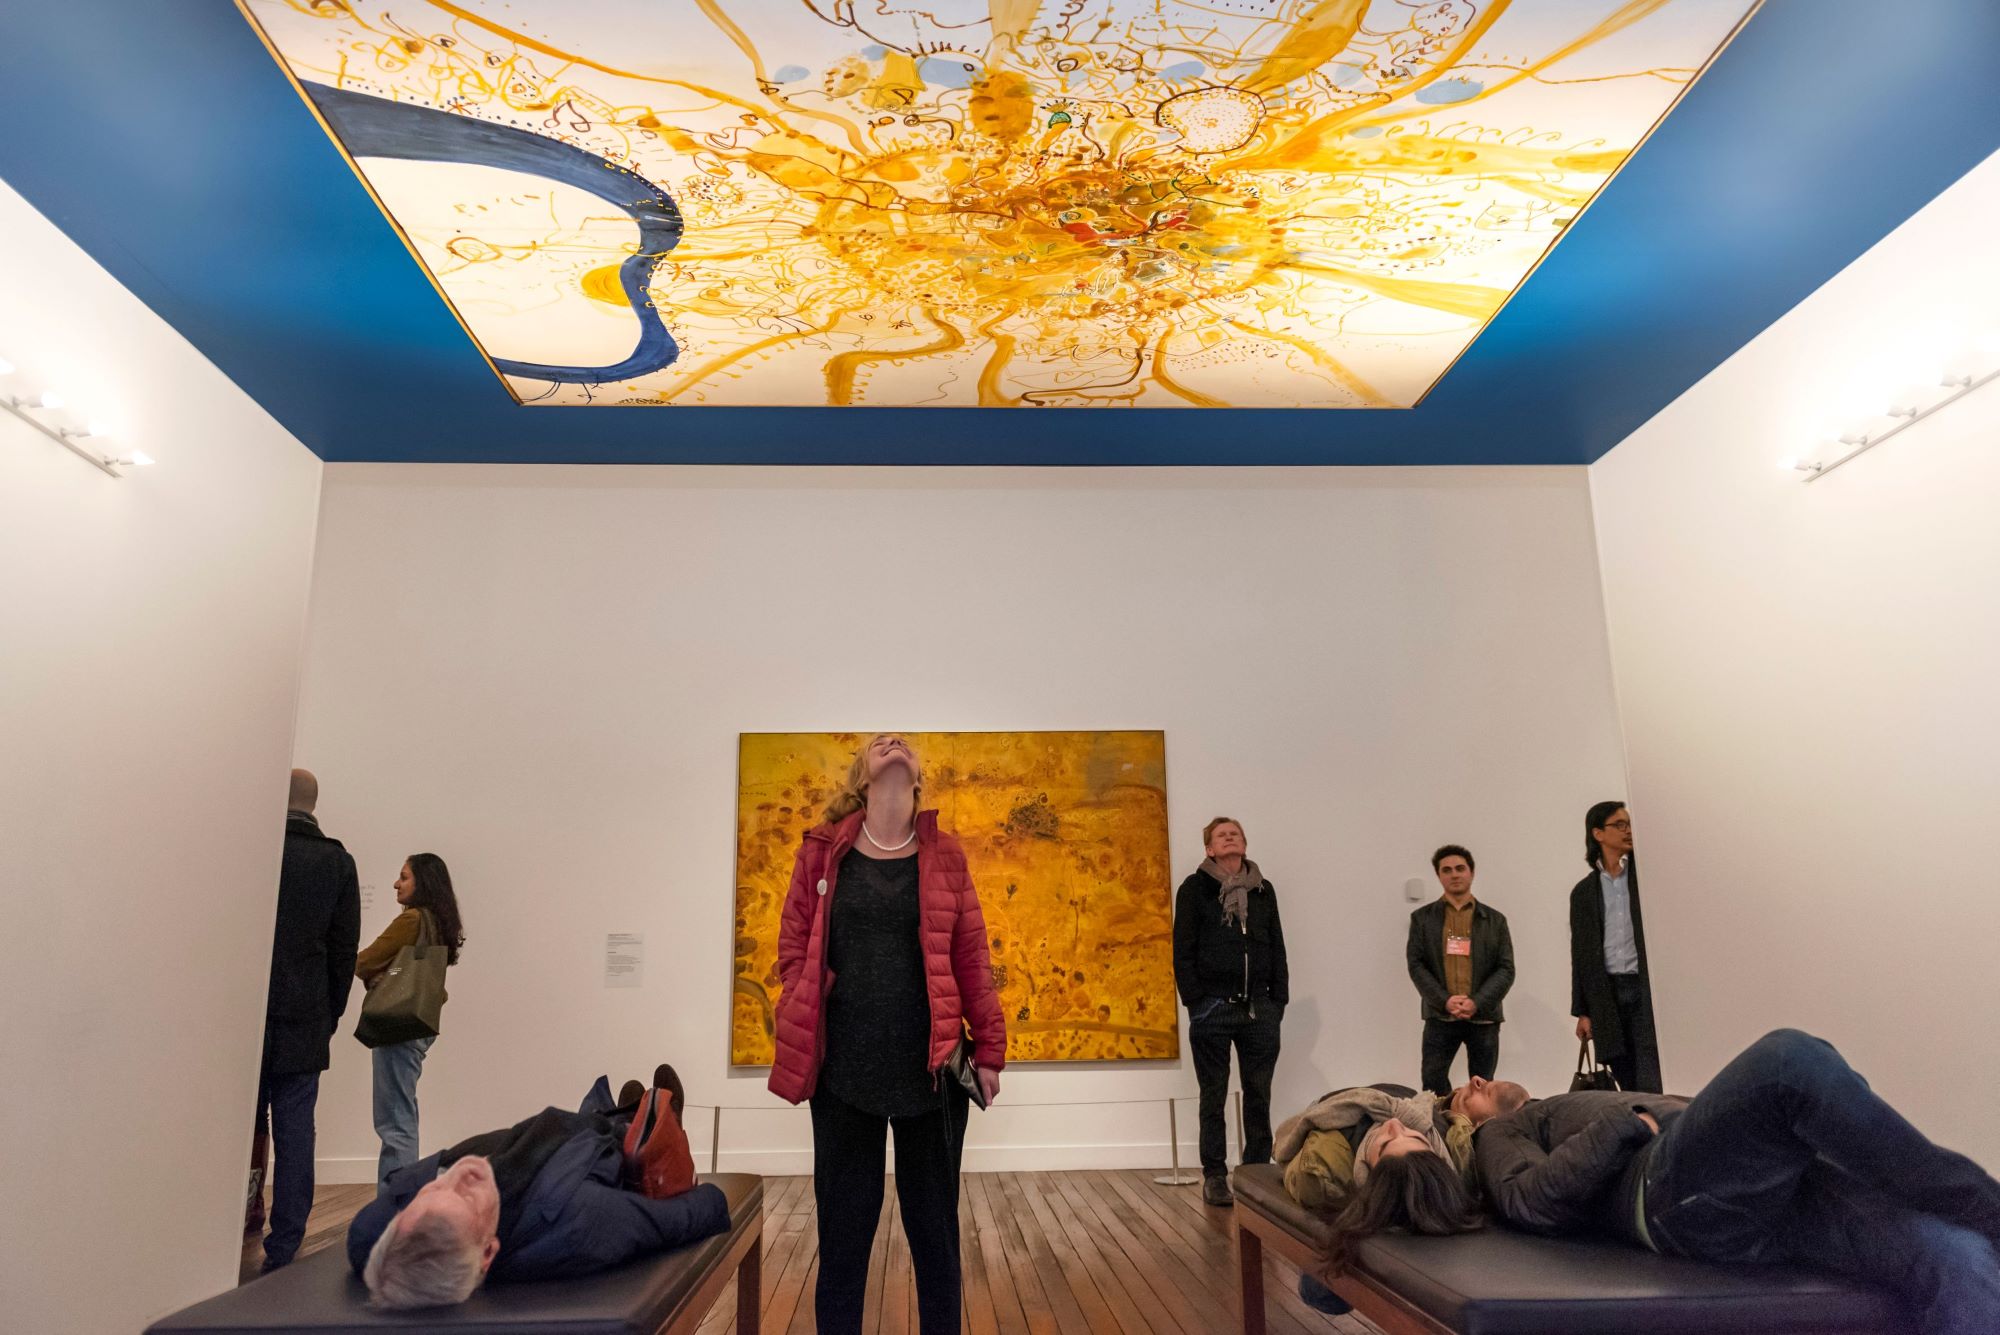 In a gallery a group of people stand or lie down all looking up at an abstract landscape painting in white, yellow and blue